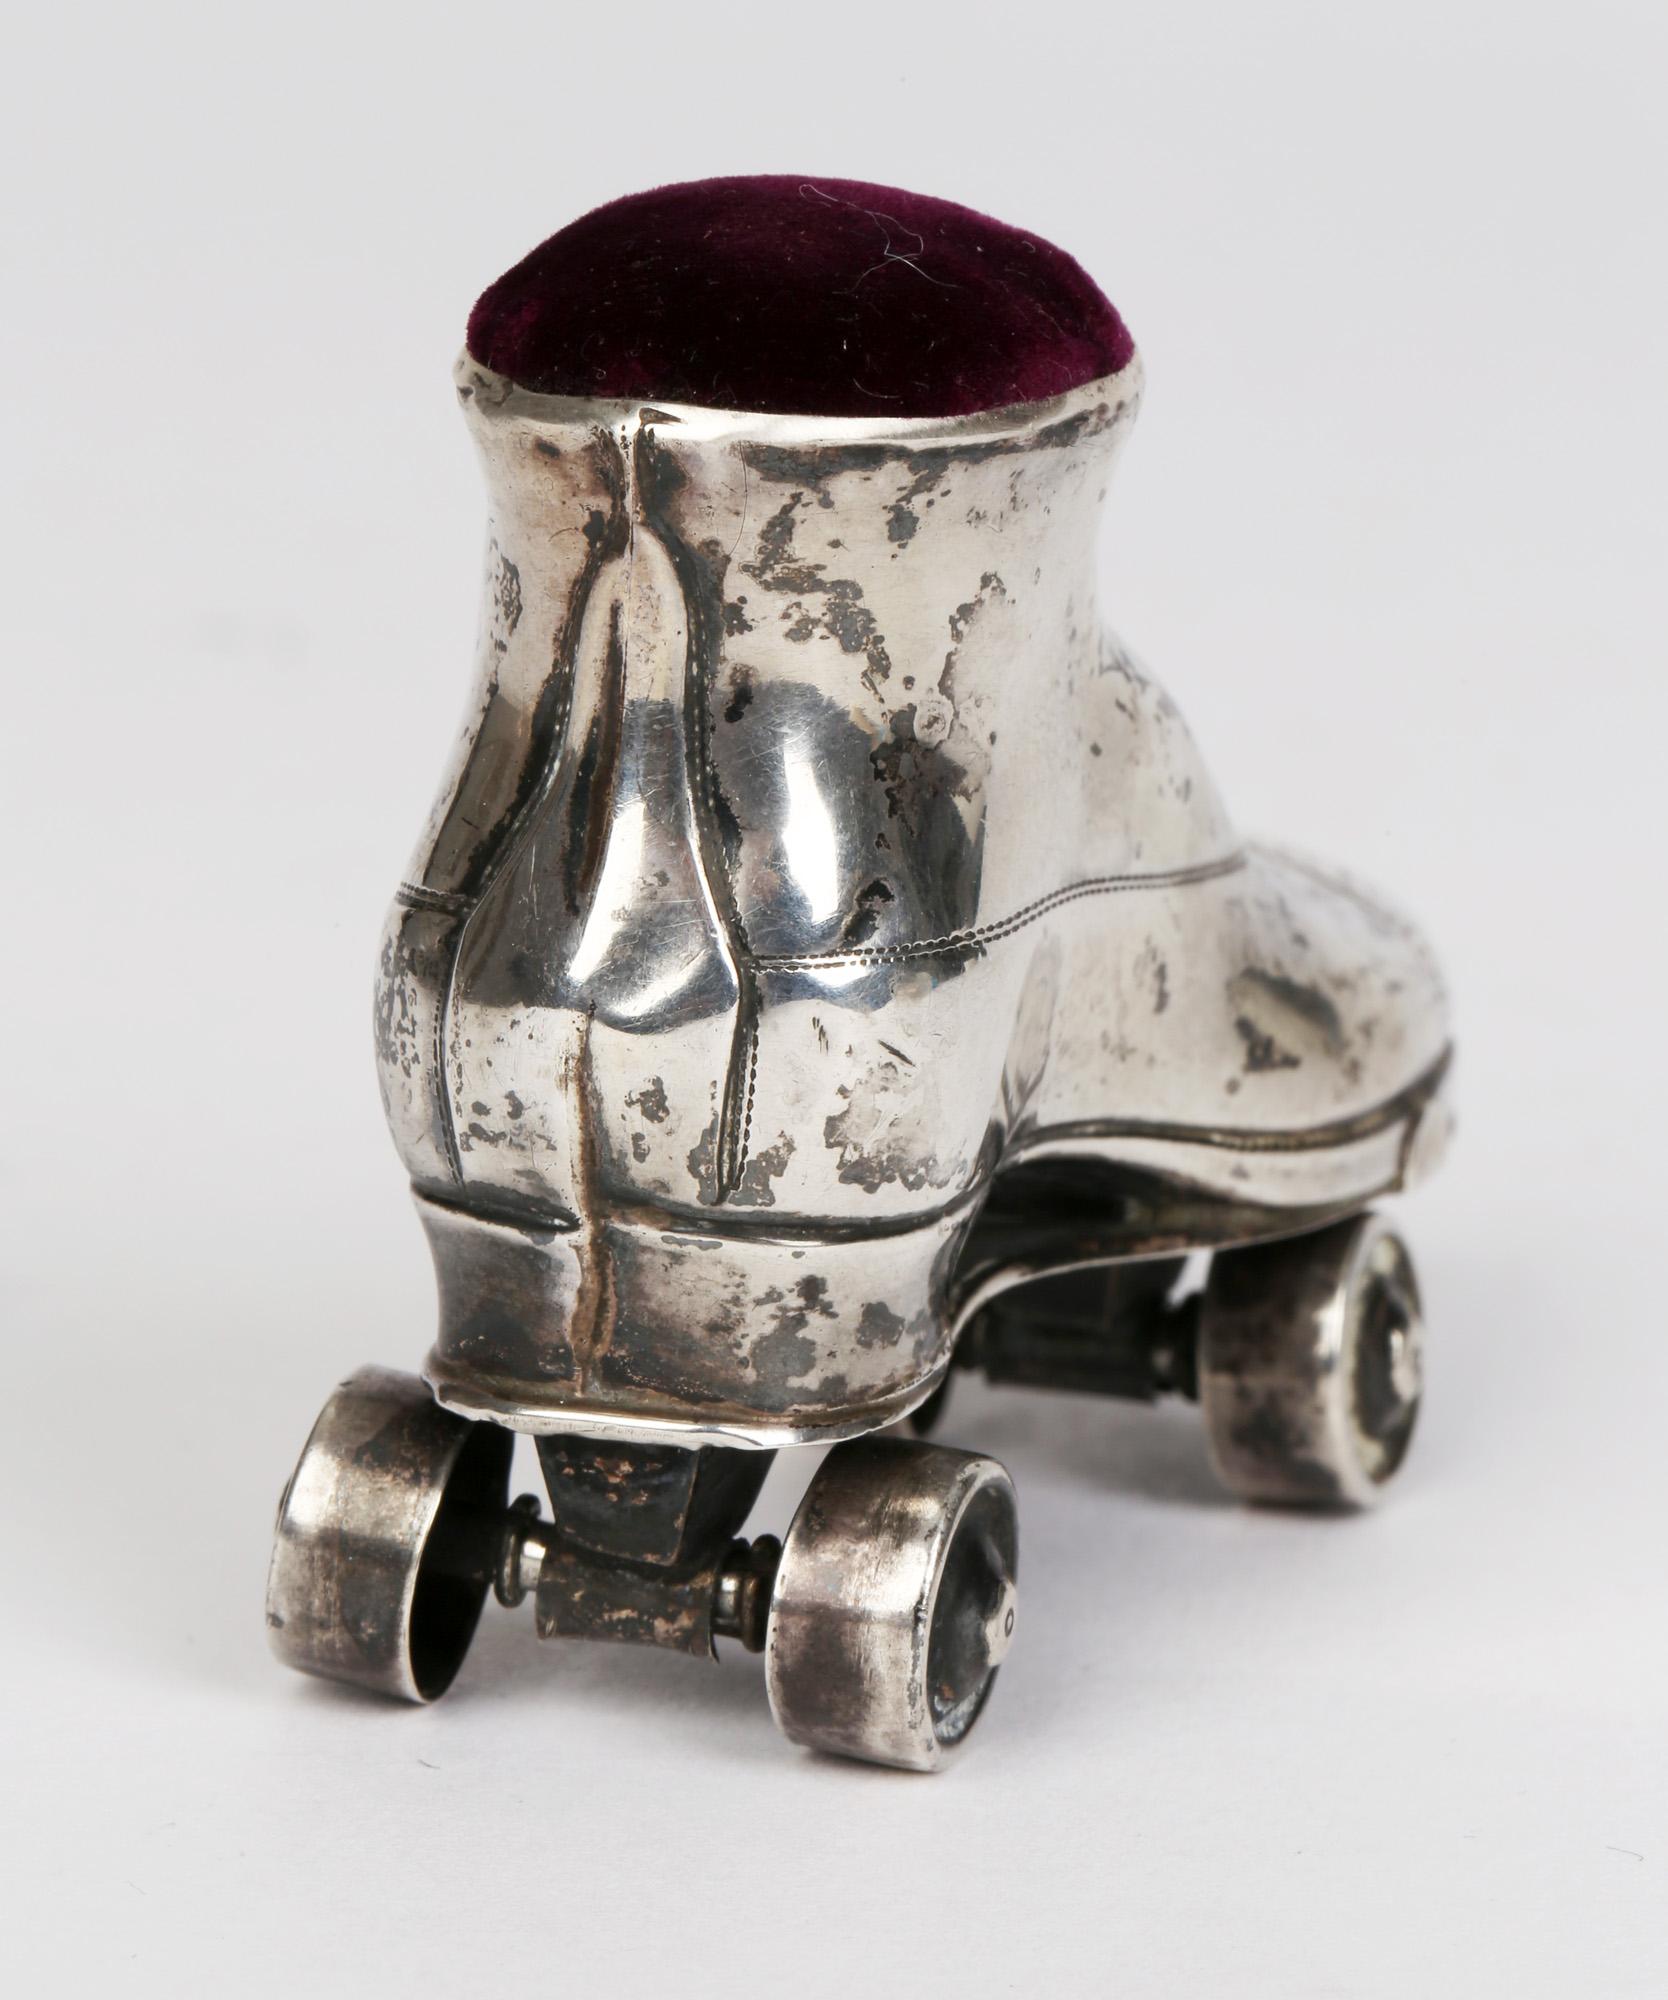 Charming Edwardian silver roller skate pin cushion by Chisford & Norris, Birmingham 1909. The roller skate is well constructed and stands fitted to a roller skate base with life like sideway movements on swivel axle wheels which also turn. The boot